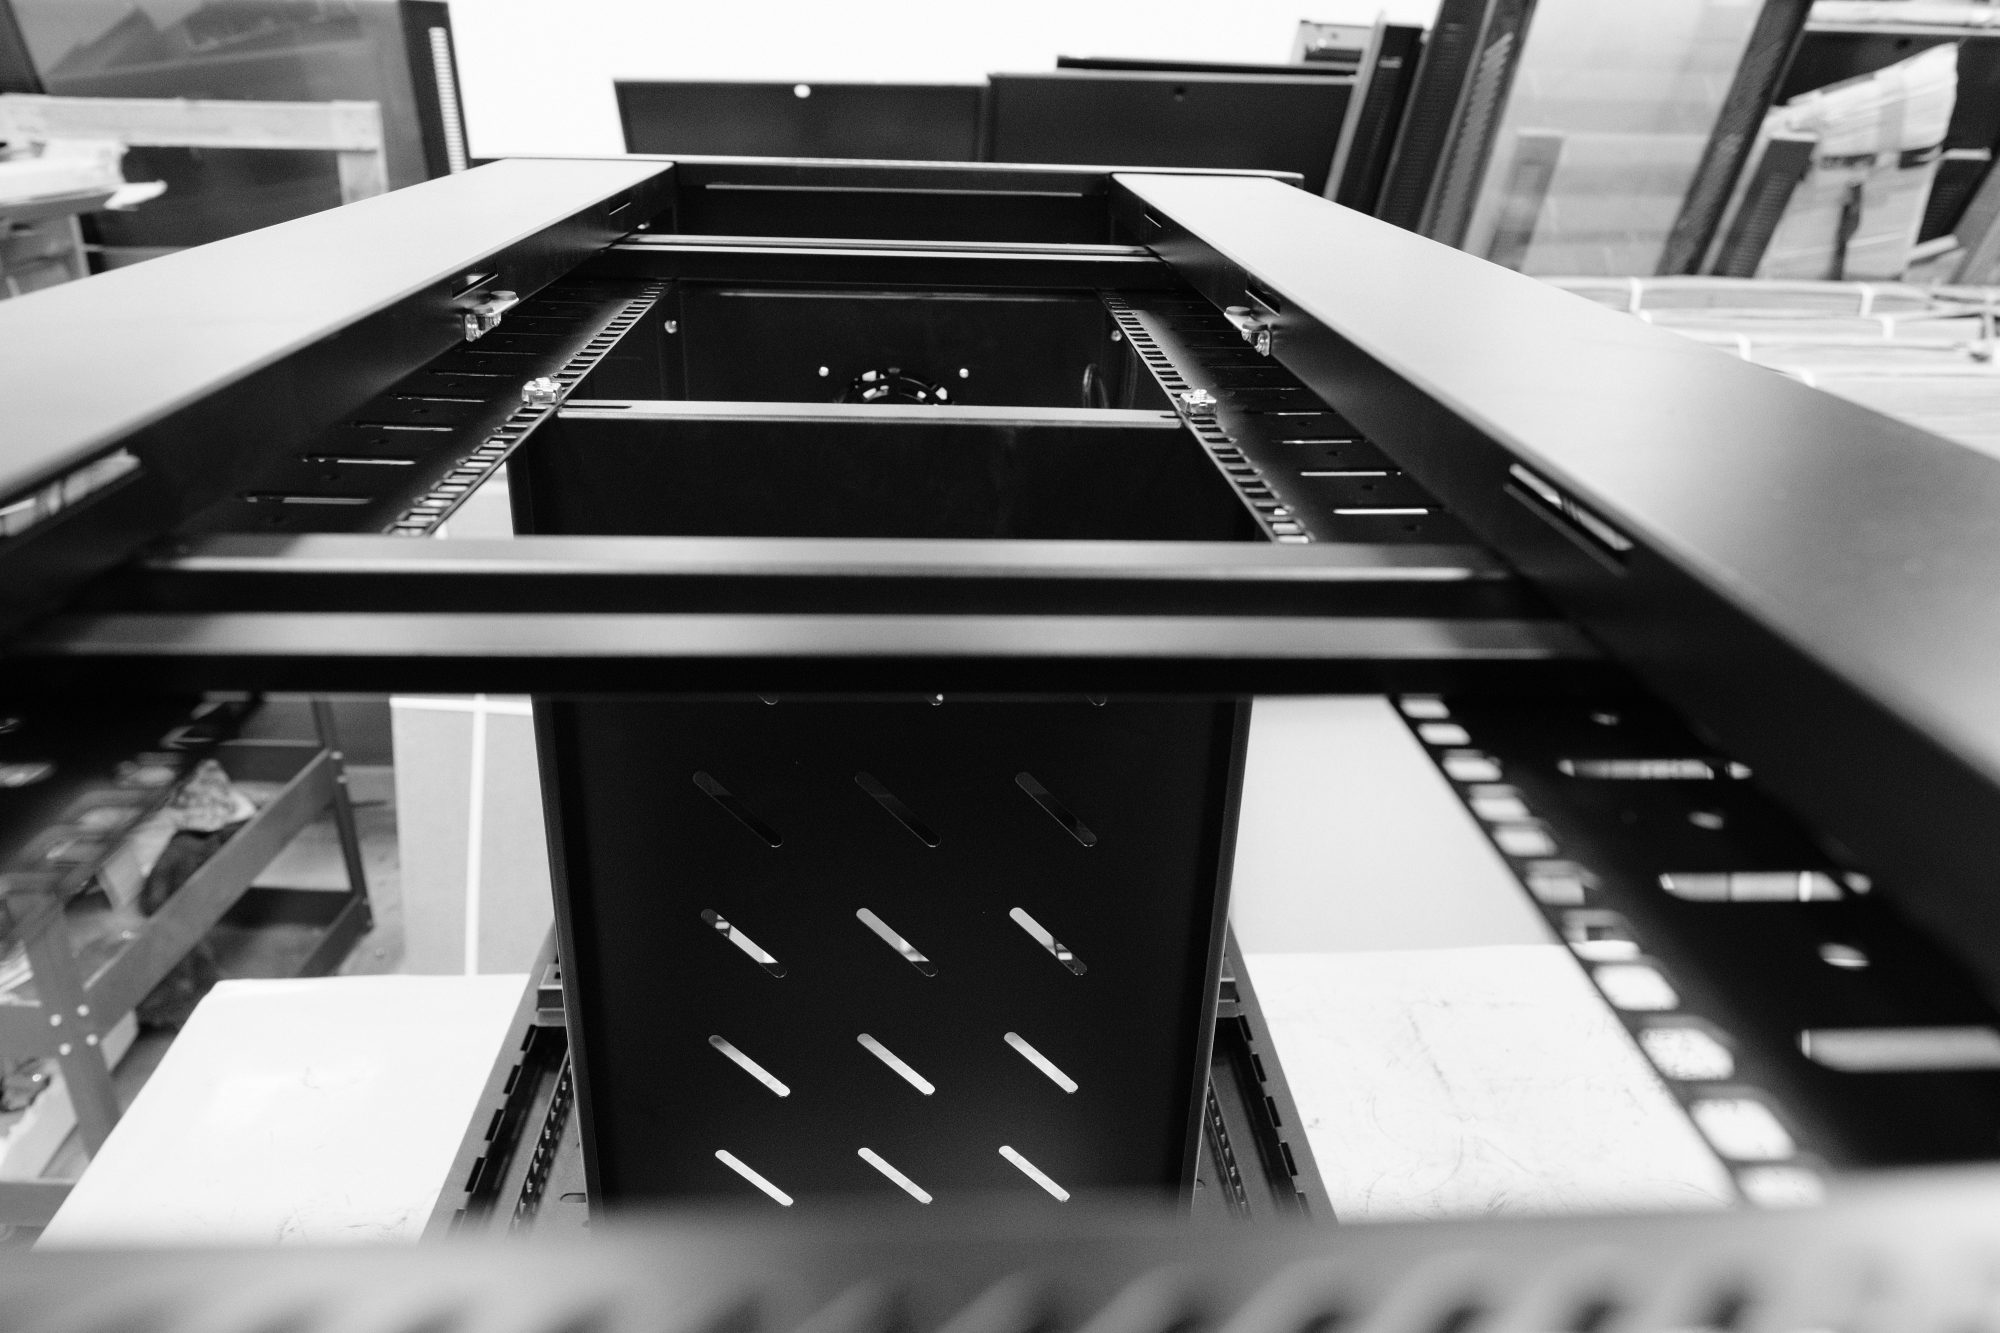 Data and networking communications cabinets and enclosures being assembled from there component parts. These floor standing cabinets will be used in data centres and server farms